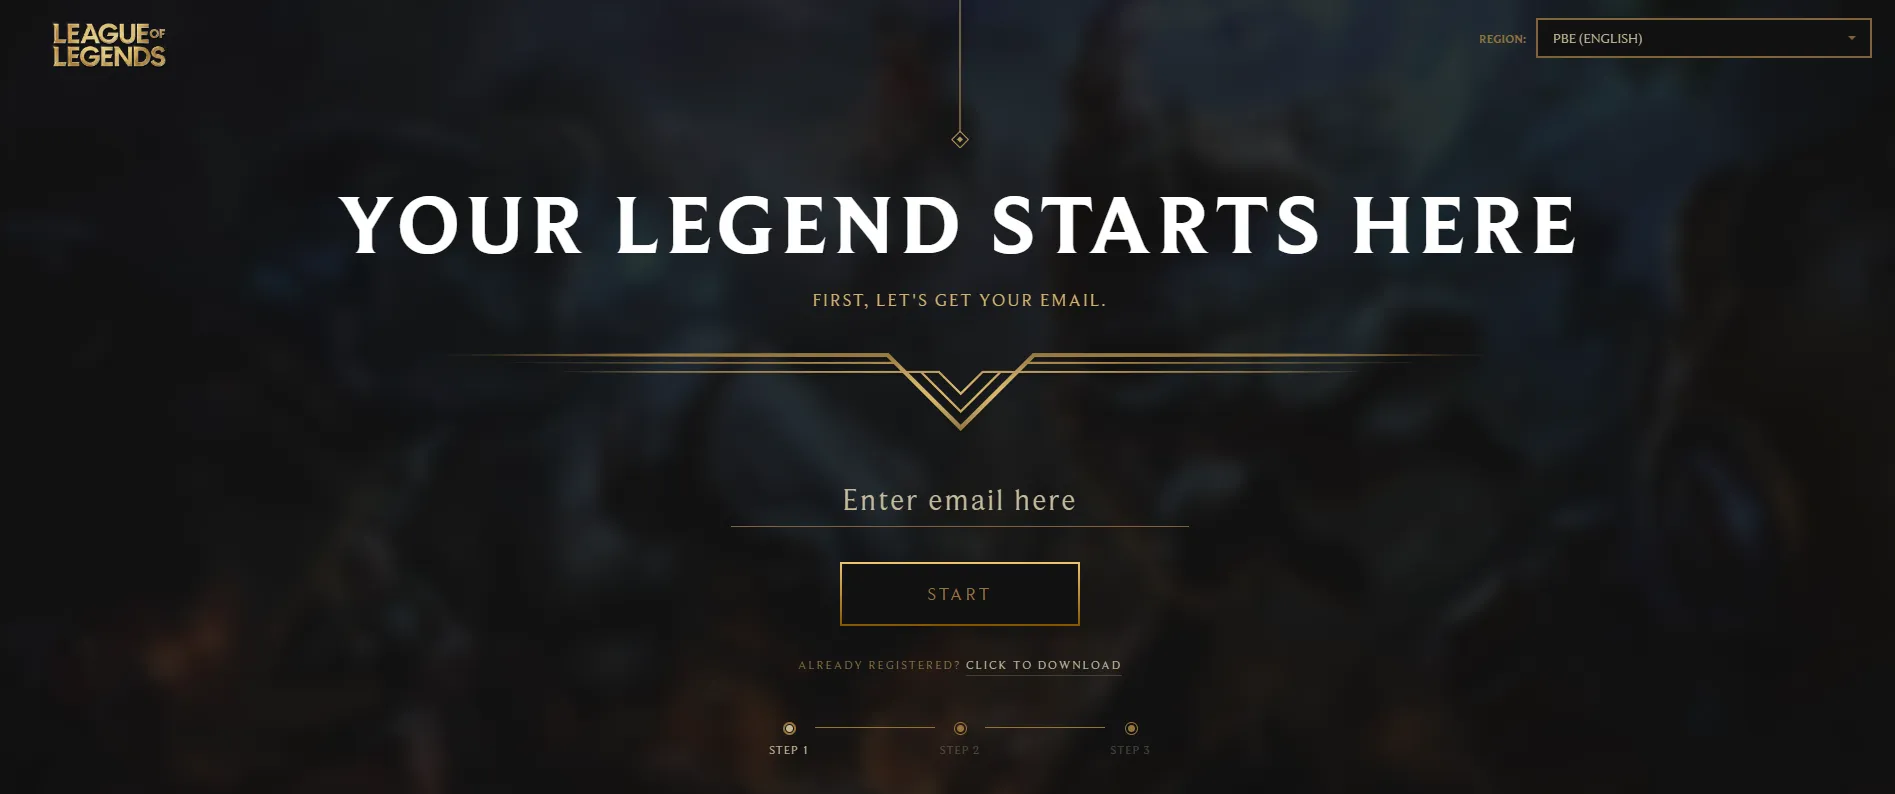 How to get a PBE account for League of Legends - 1v9